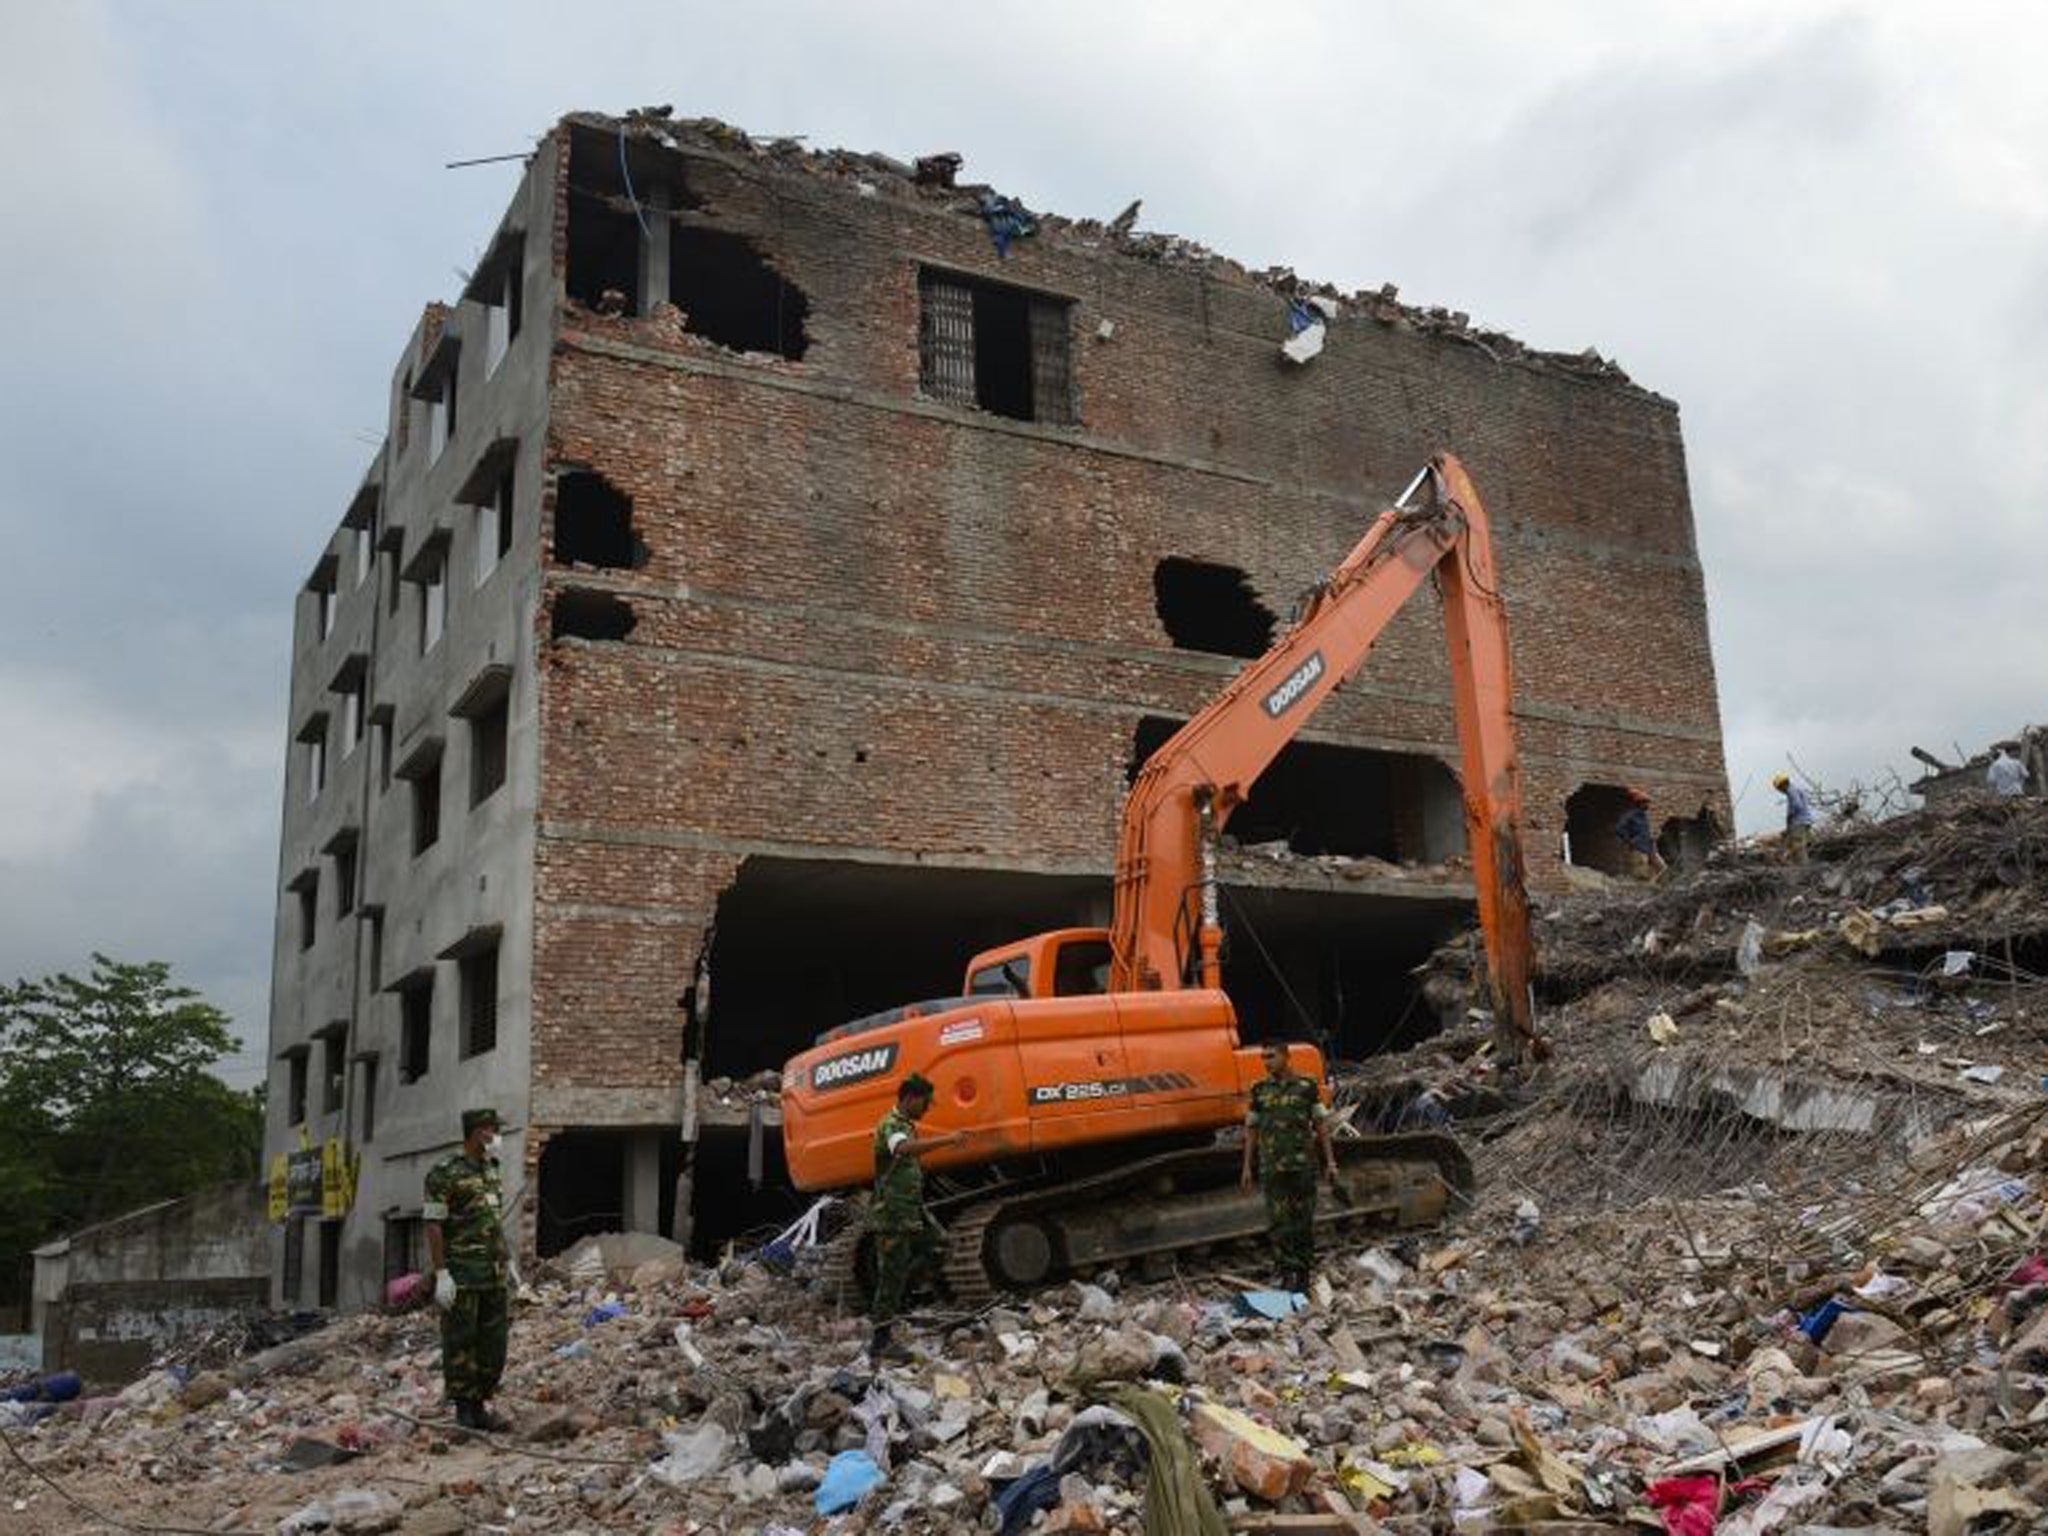 Workers and army personnel use heavy machinery to clear the site and recover bodies of victims from the rubble of the garment factory building collapse near Dhaka, Bangladesh